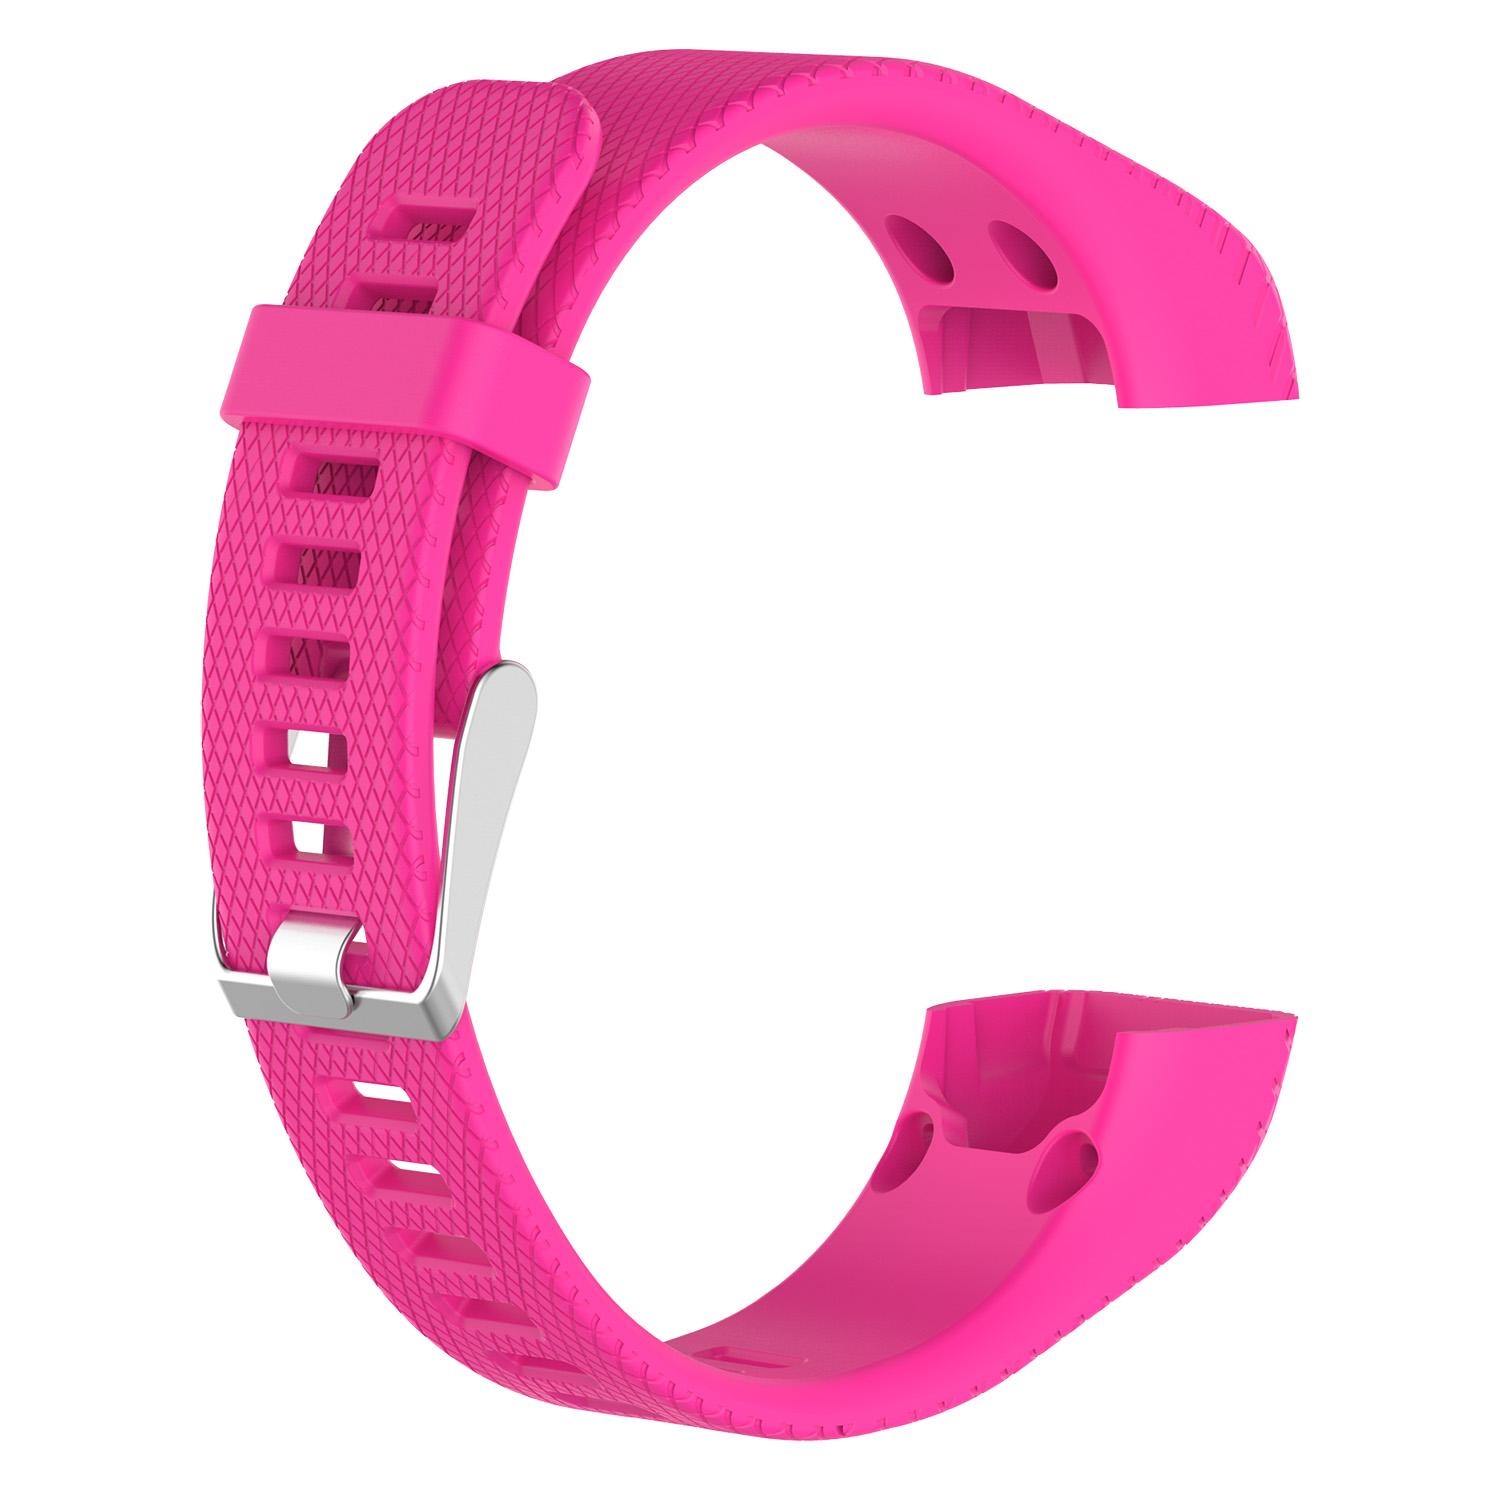 Bakeey-Texture-Silicone-Replacement-Strap-Smart-Watch-Band-For-Garmin-Vivosmart-HRApproach-X10X40-1739176-7